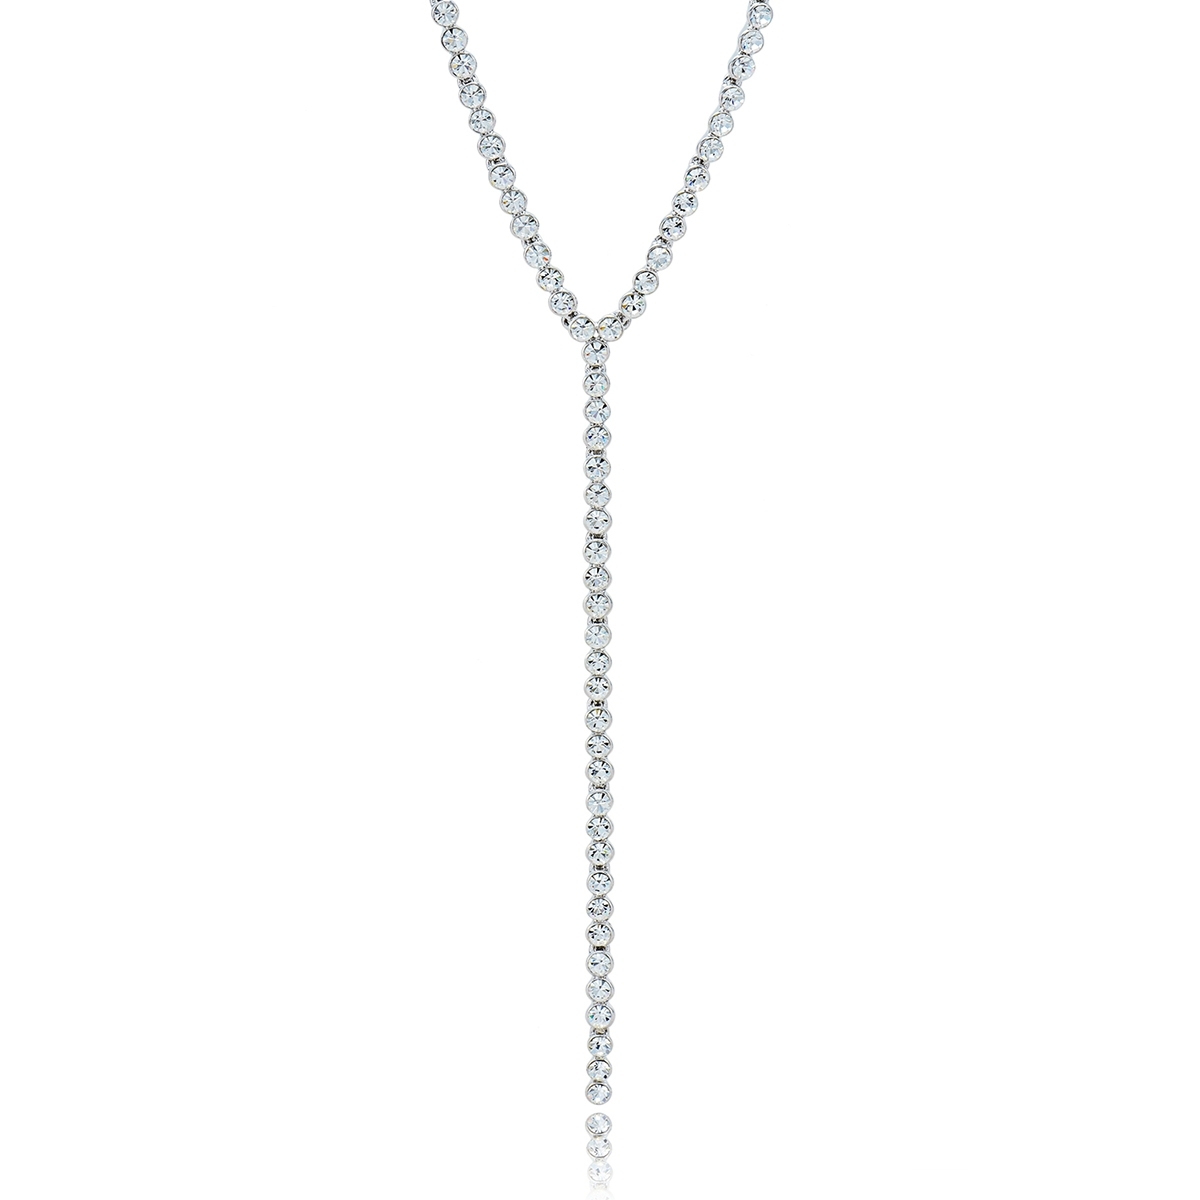 Buy Platinum Plated Concise Long Chain>20 Inches